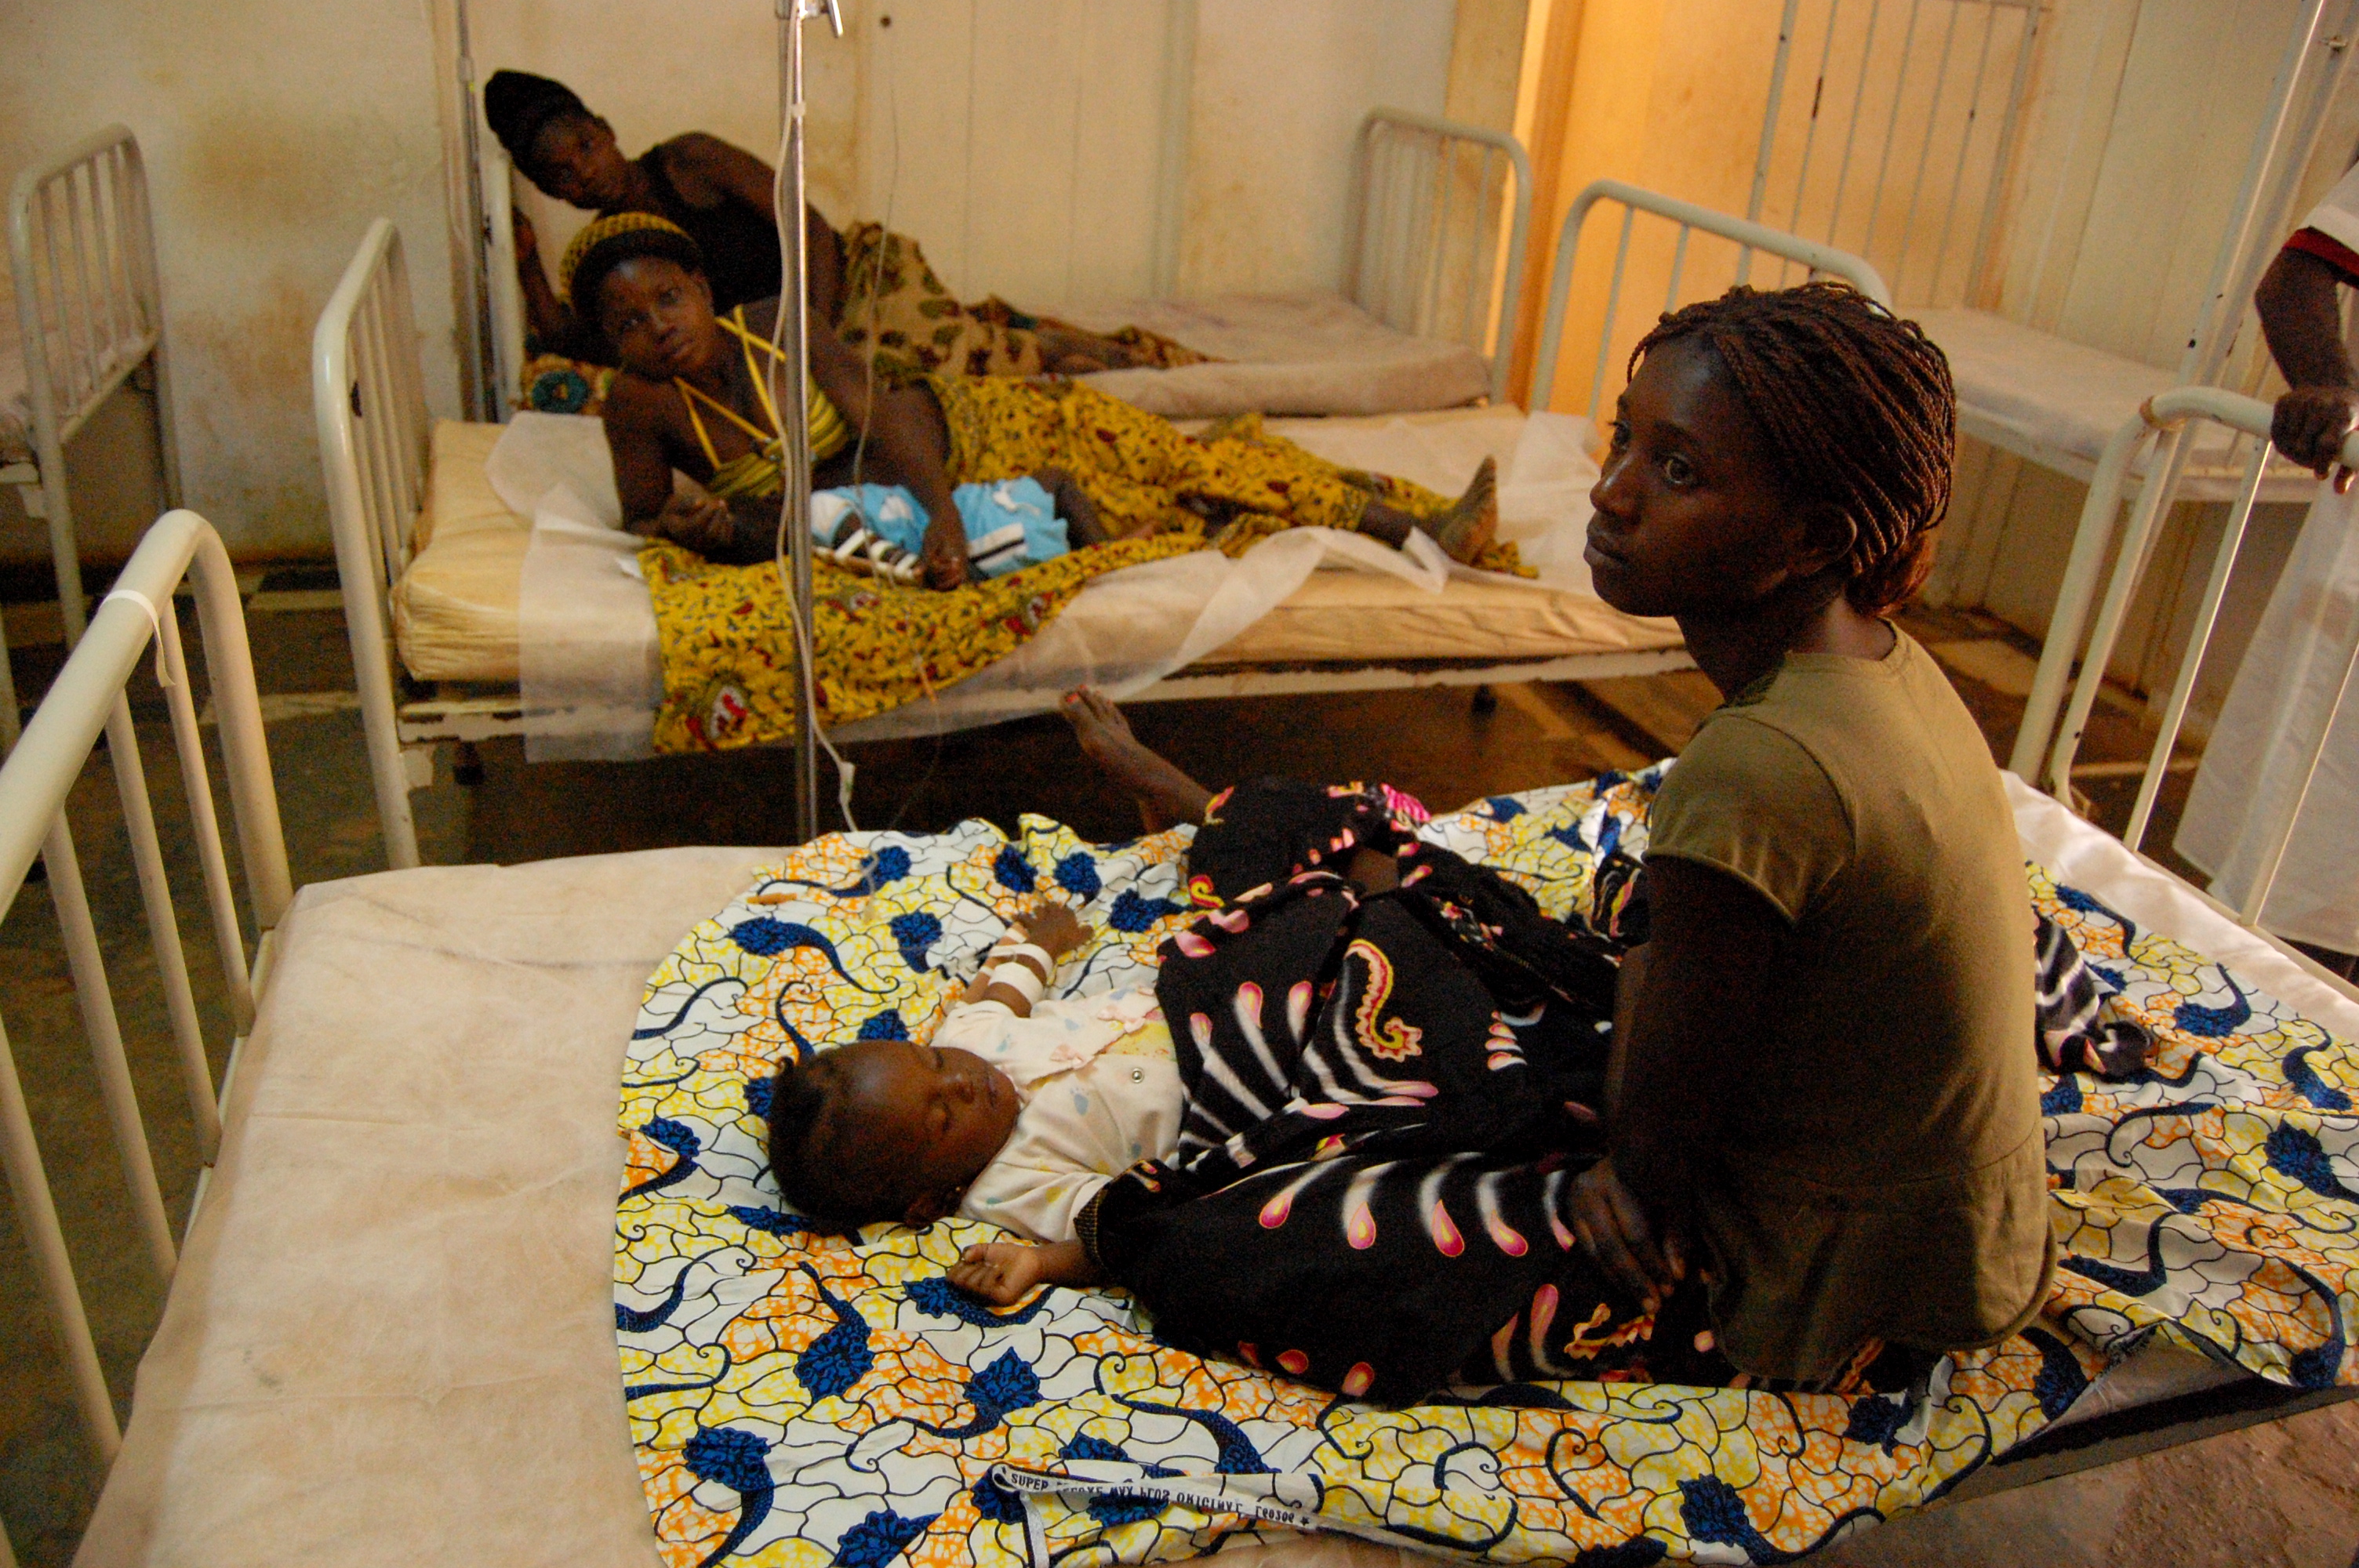 File:Health care for sick babies (5686758533).jpg - Wikimedia Commons